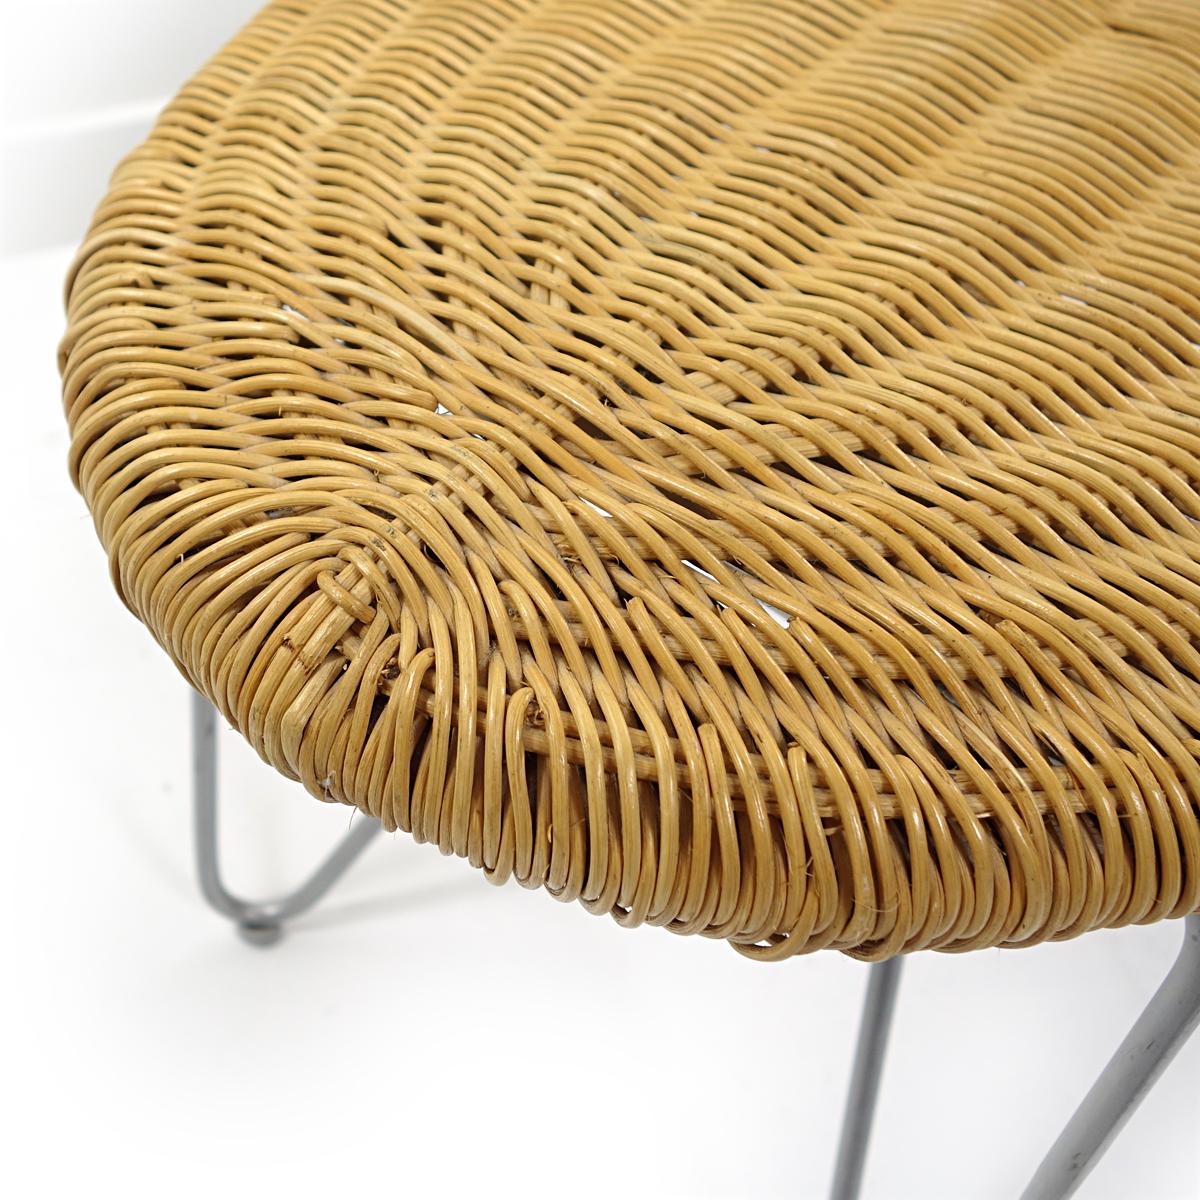 Late 20th Century Bench in the Shape of a Peeling Peanut Made of Rattan, Wood and Stainless Steel For Sale